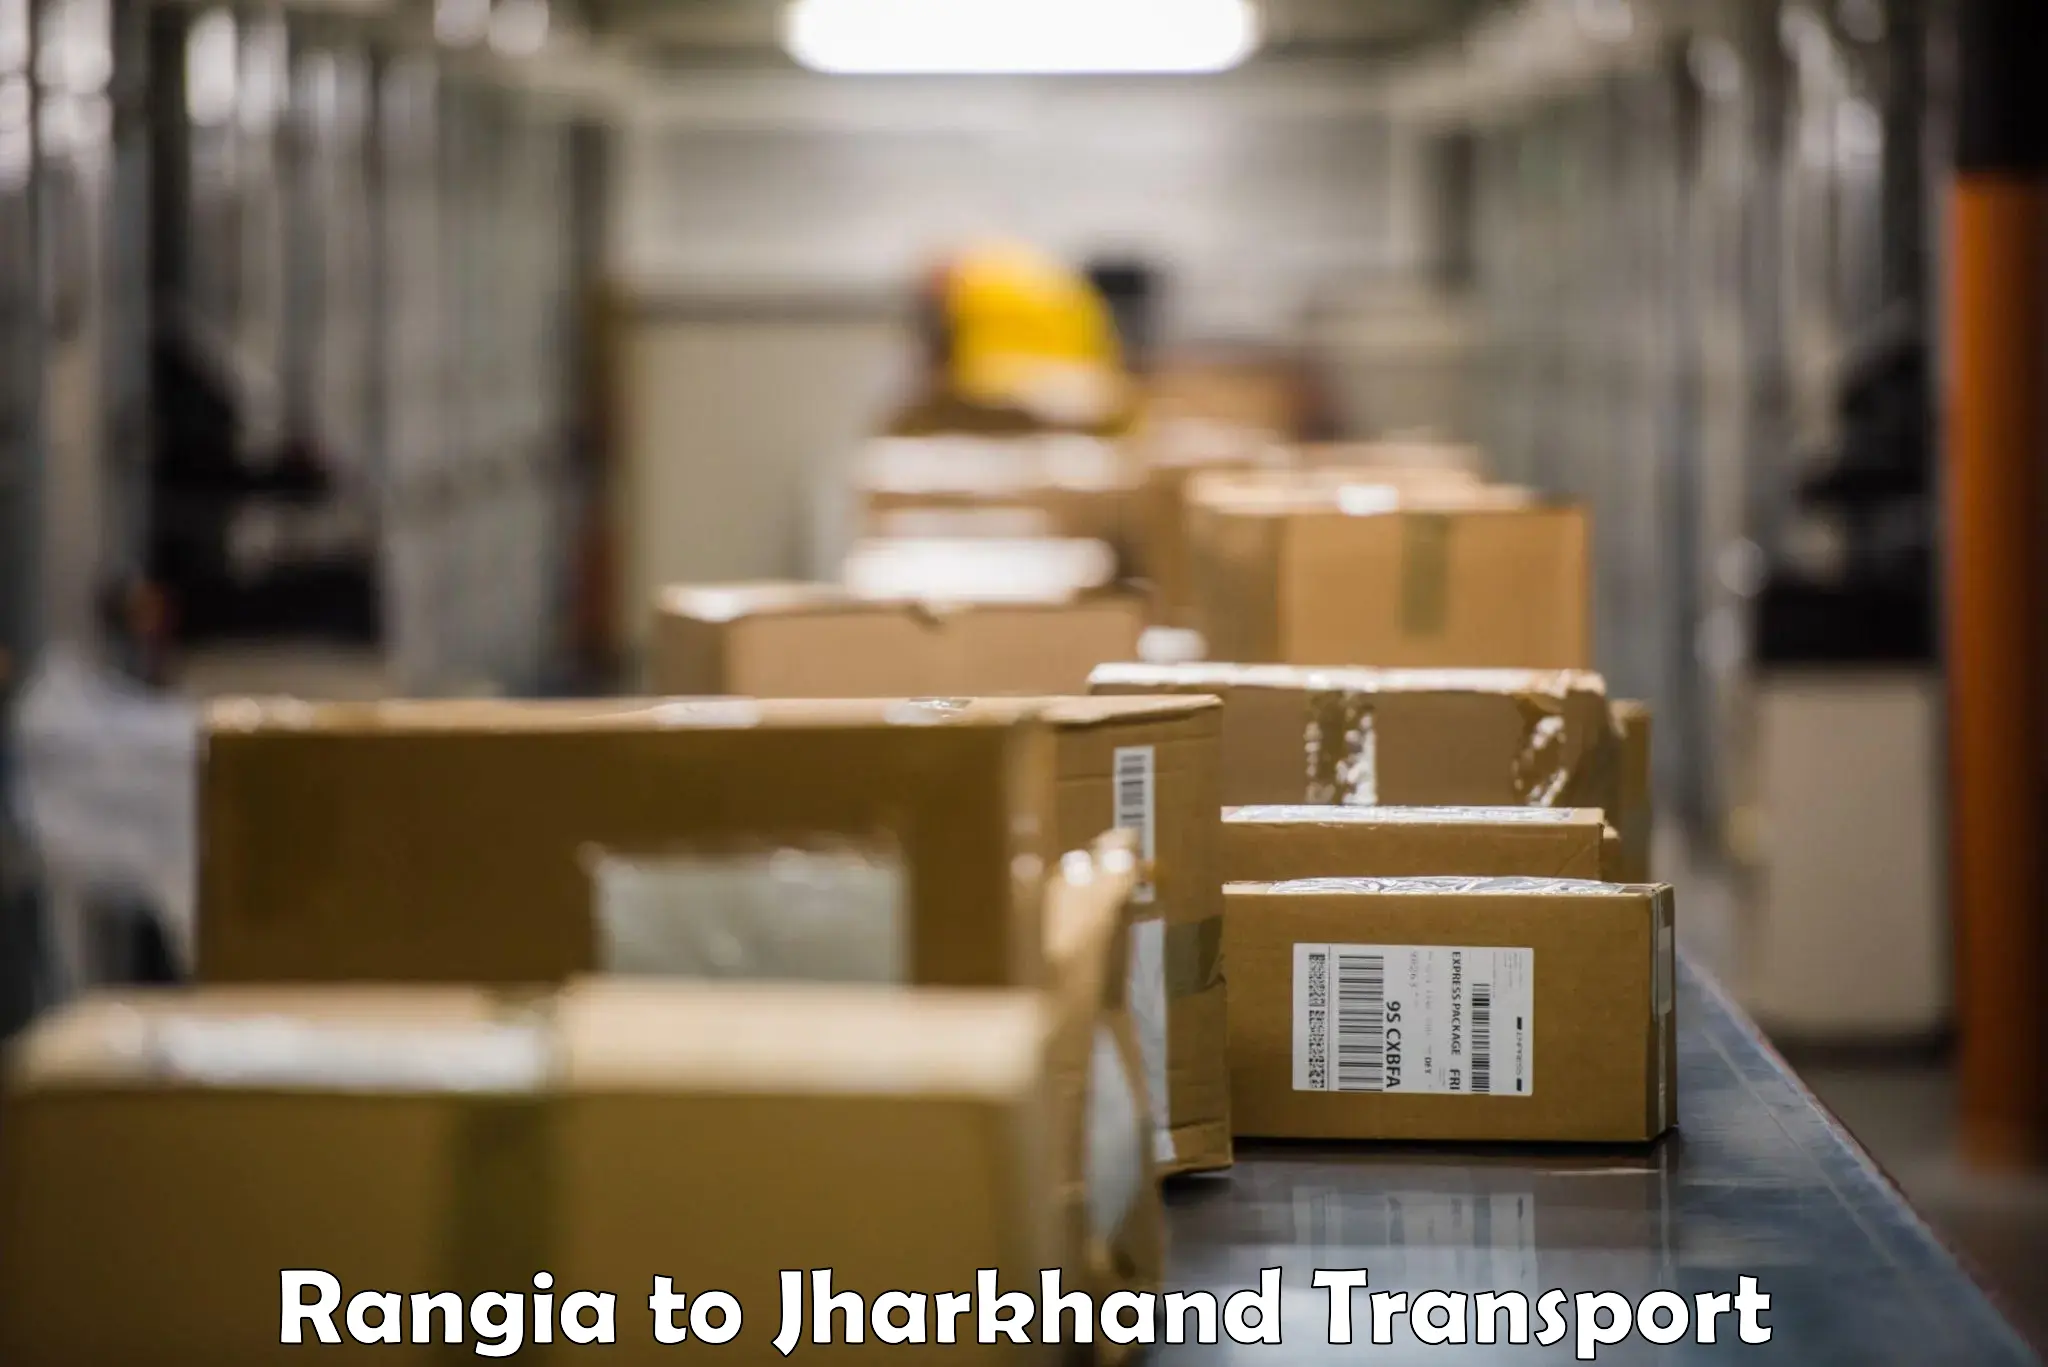 Delivery service Rangia to Dhanbad